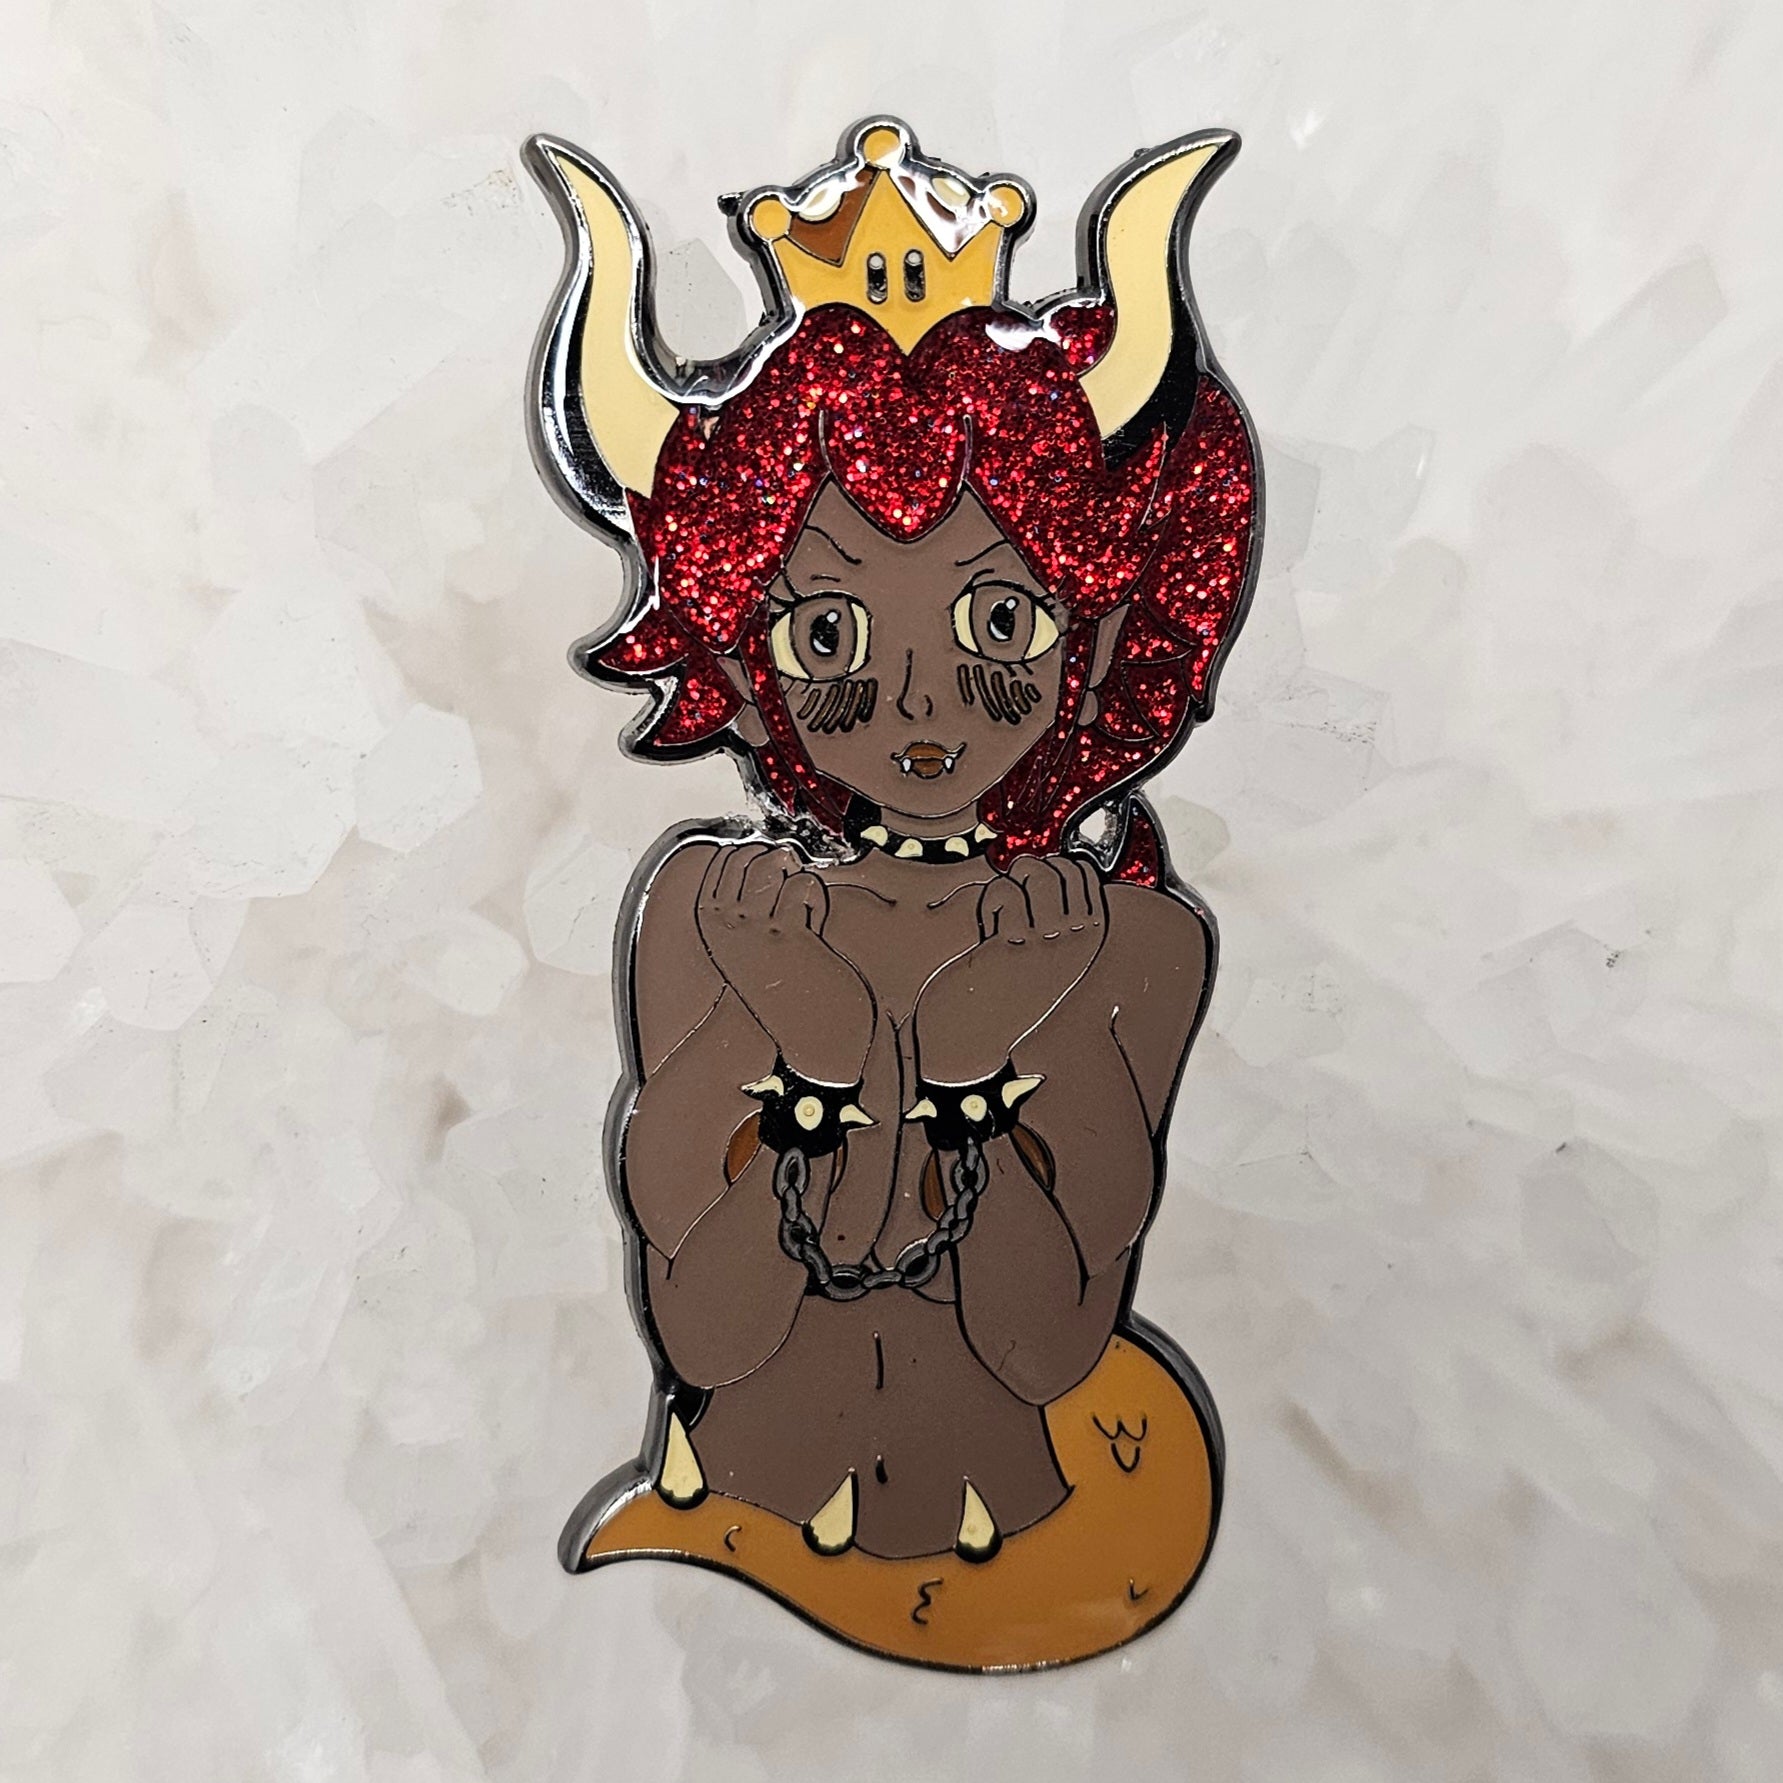 Bowsette V2 Sexy Bowser Super Kinked Mario Bros Video Game Pin Up Glitter Enamel Pins Hat Pins Lapel Pin Brooch Badge Festival Pin